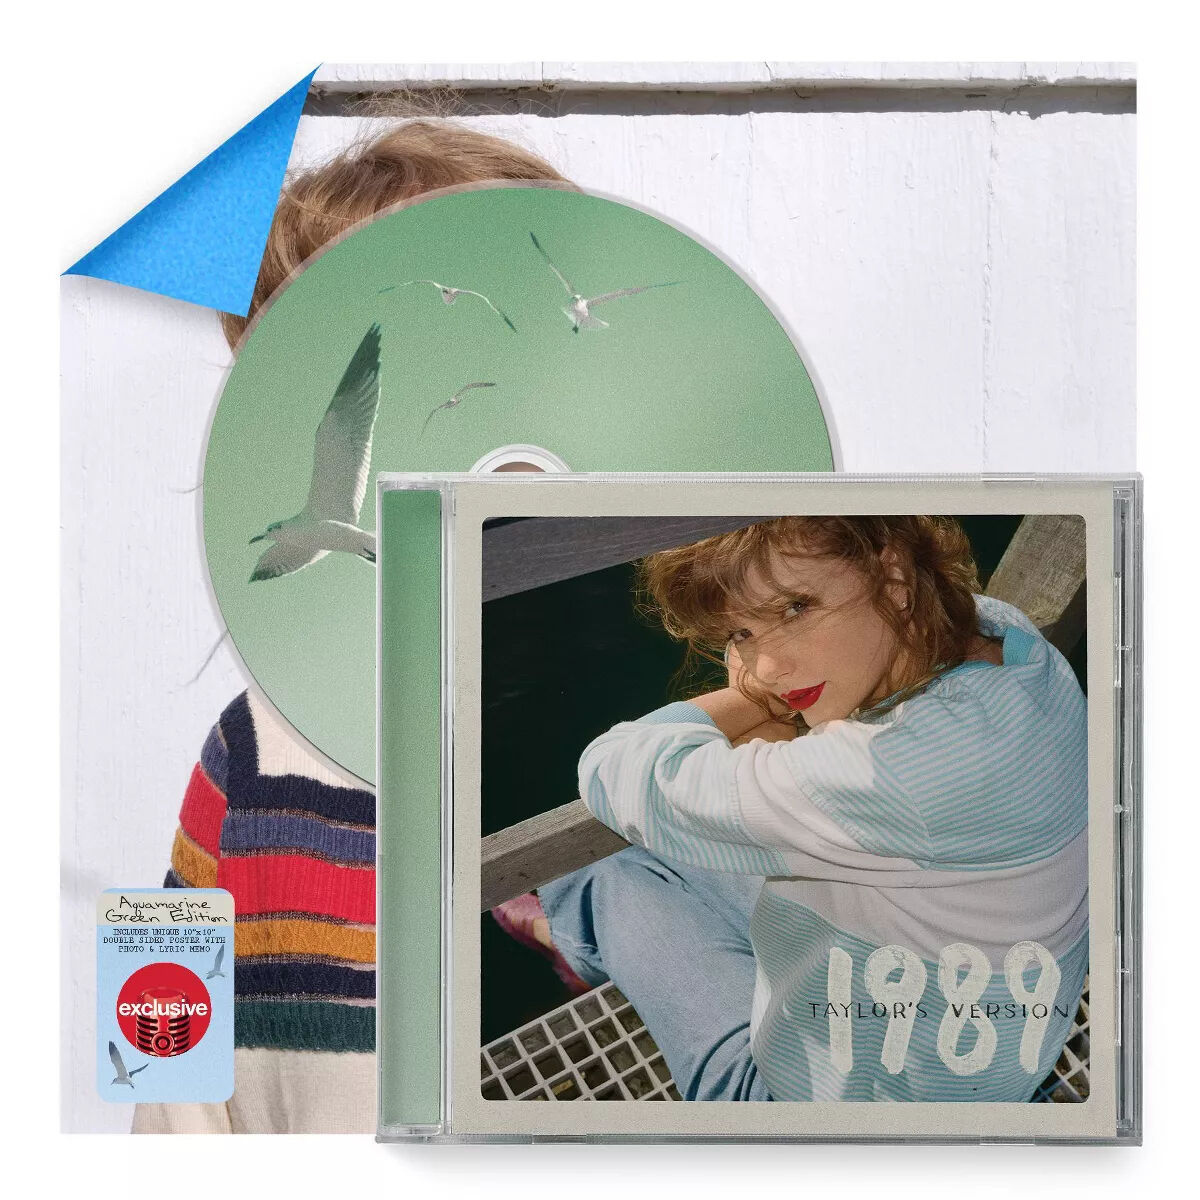 TAYLOR SWIFT 1989 (Taylor’s Version) Aquamarine Green Deluxe Edition Target CD